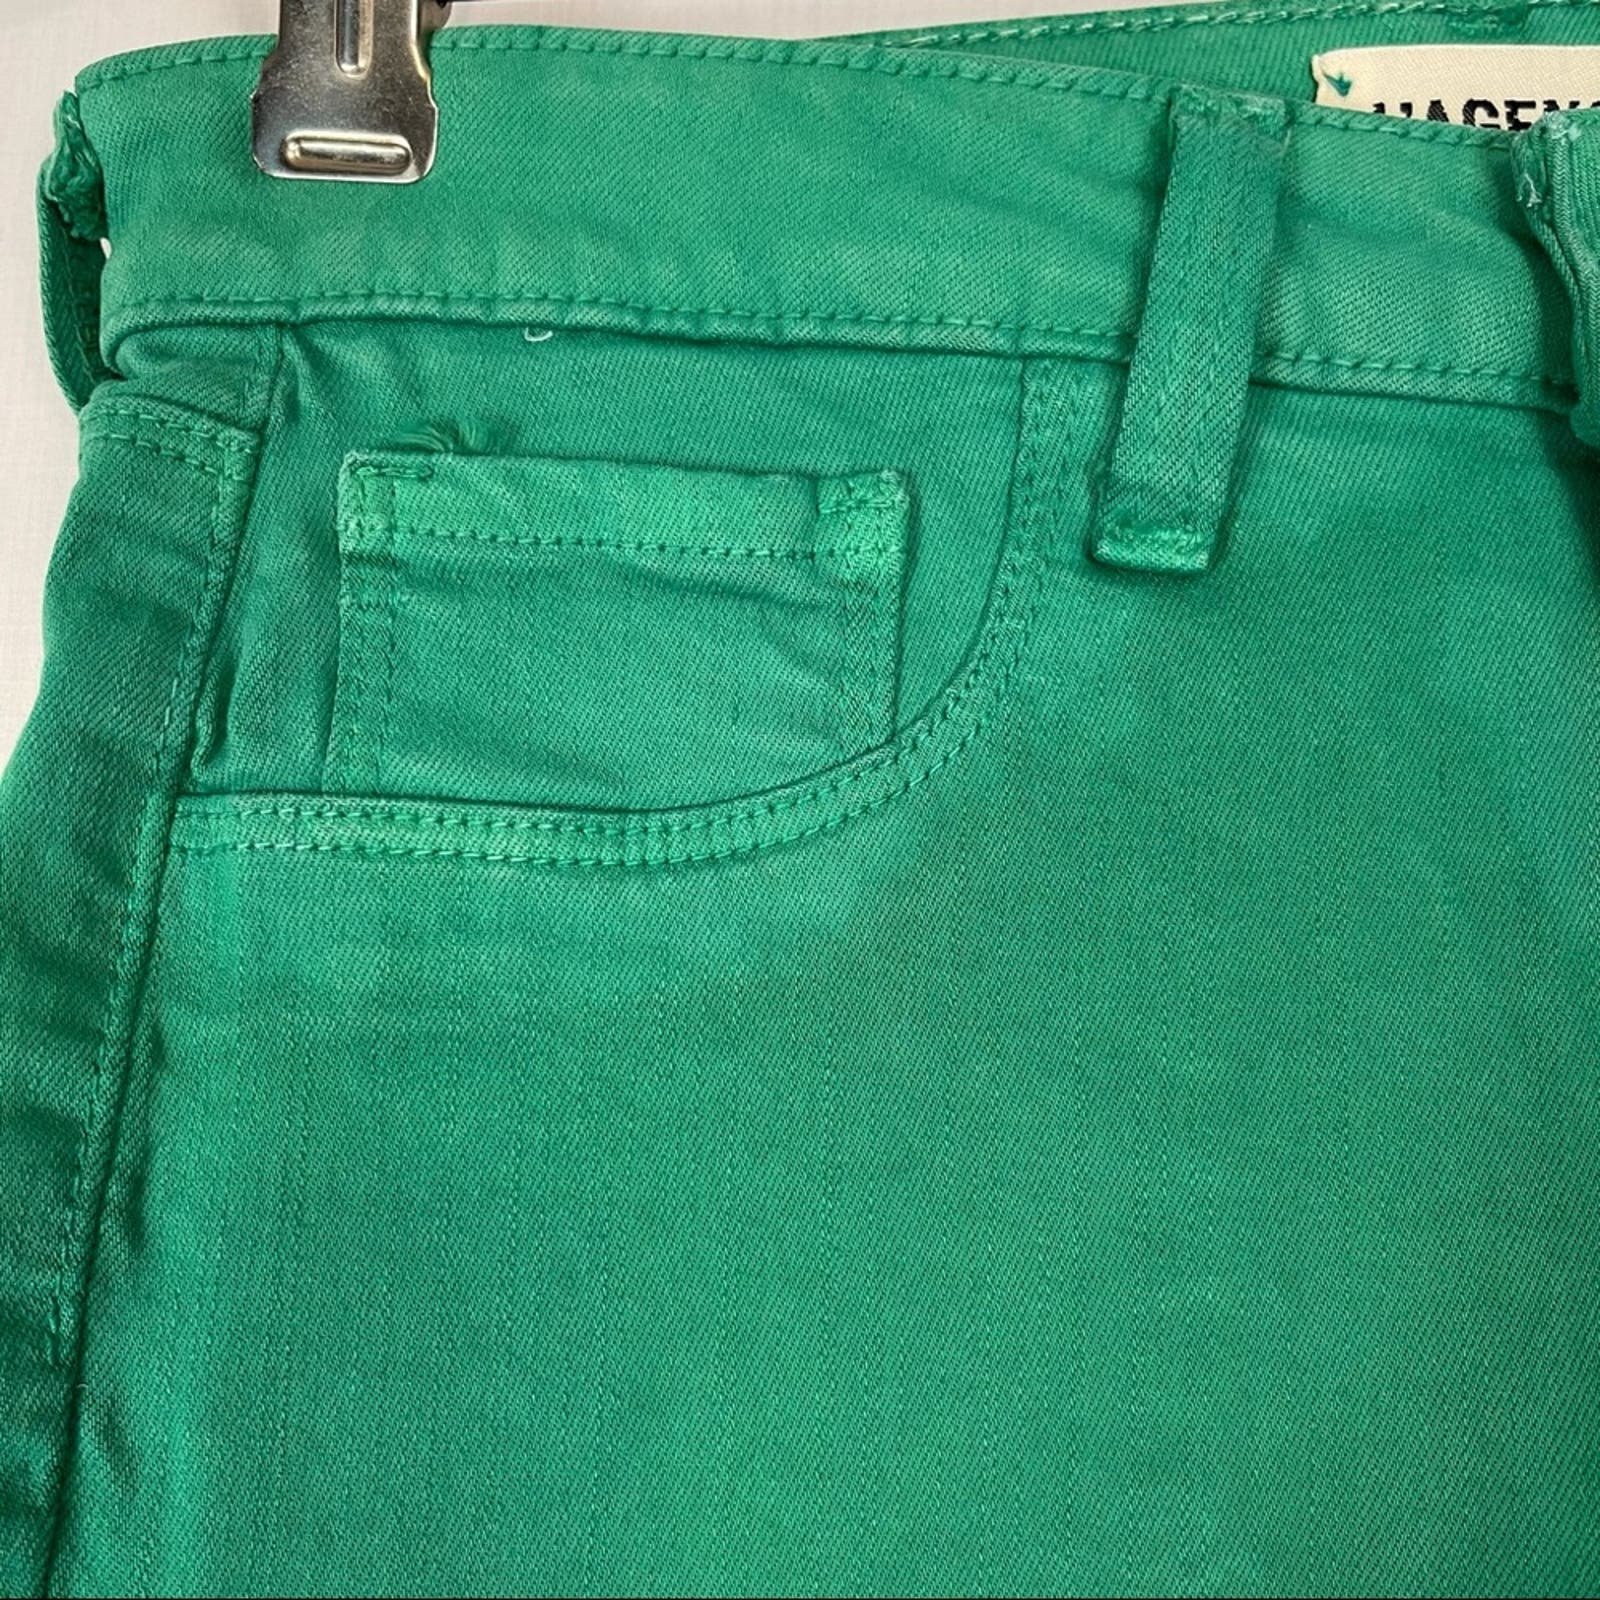 Stylish L’AGENCE Marguerite Green High Rise Skinny Jeans Size 25 NWT nbev8jYQr Cool